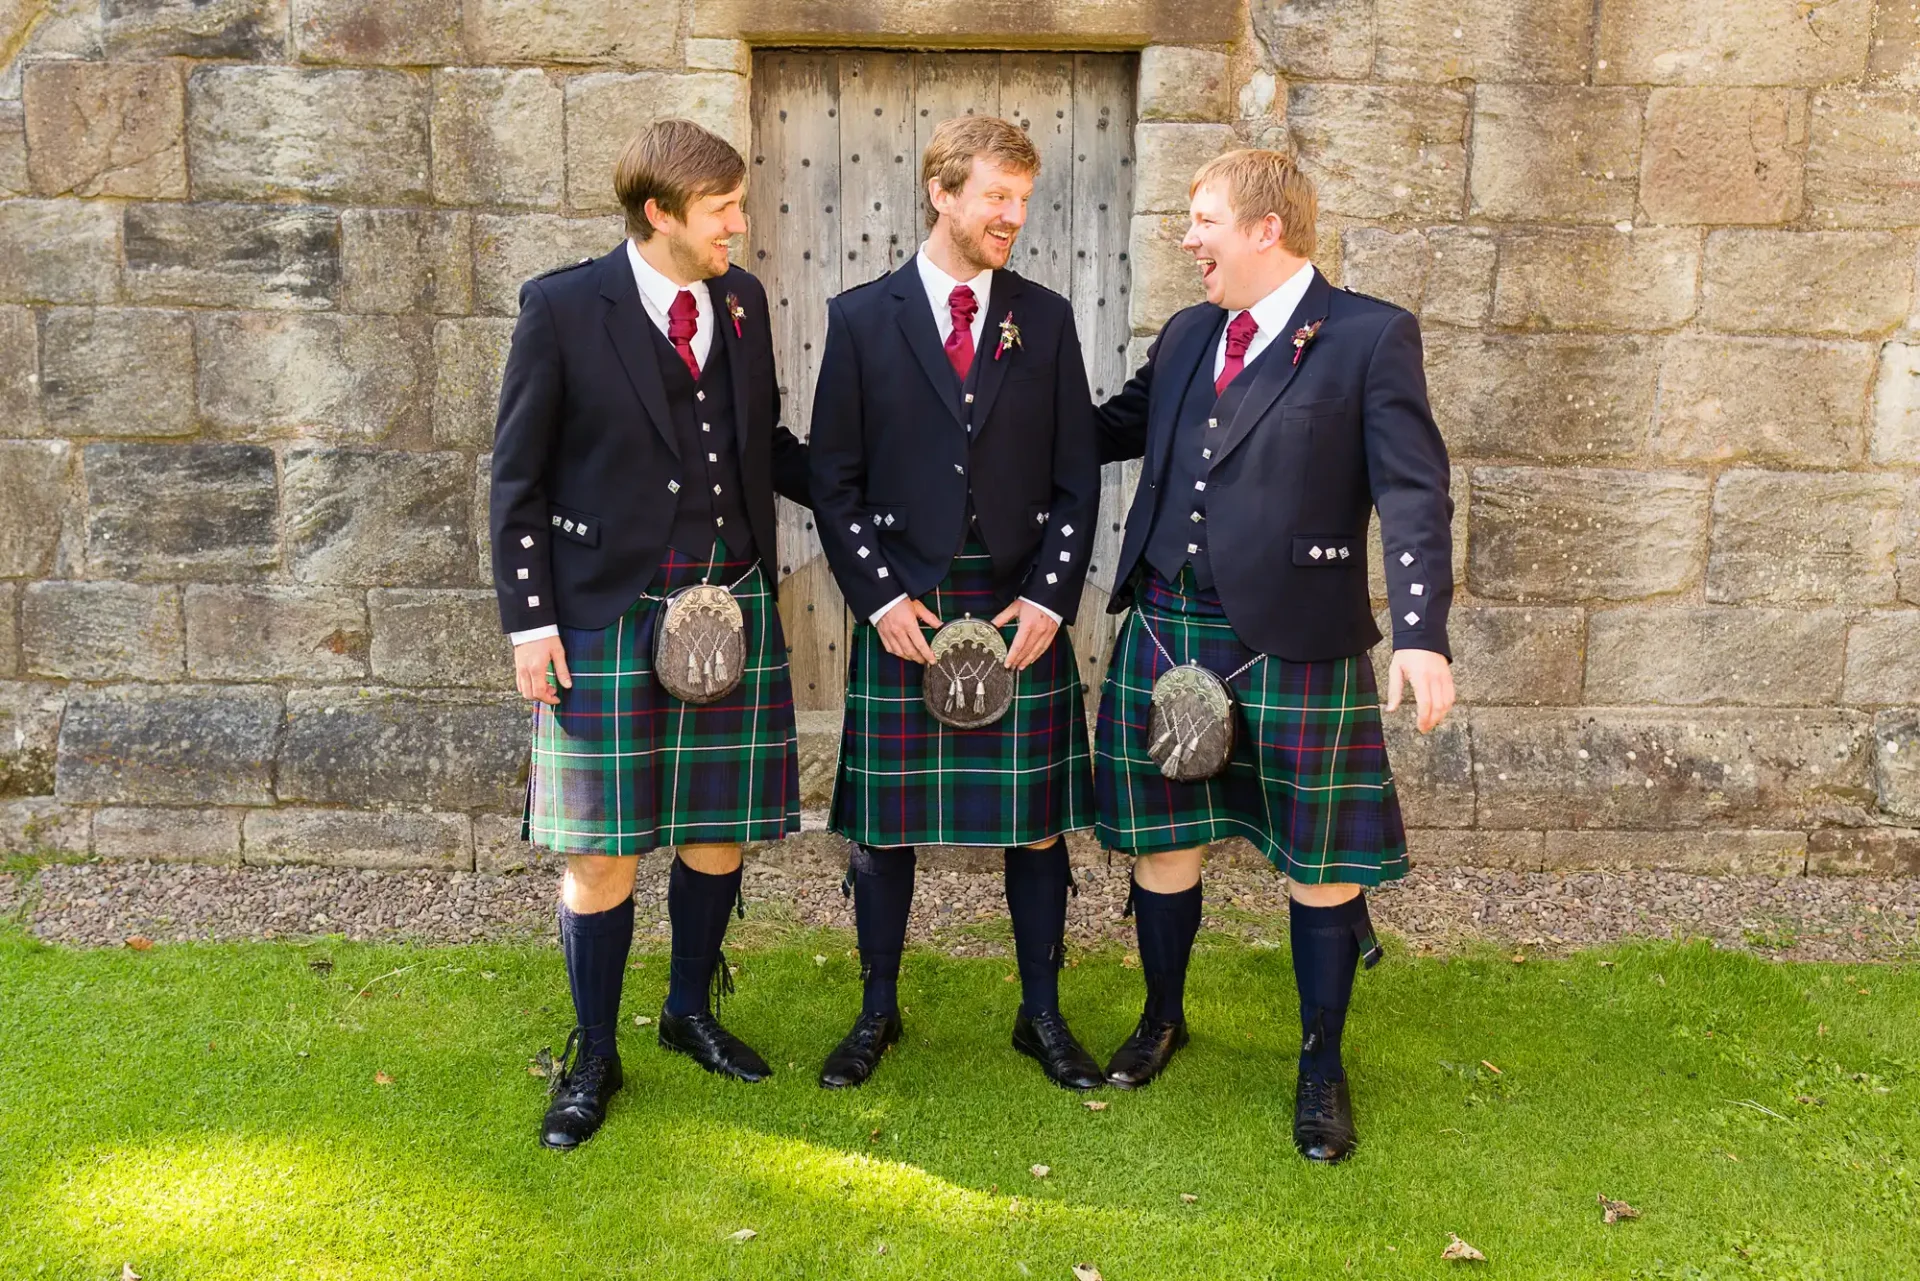 Three men in traditional scottish kilts and jackets, smiling and conversing outside a stone building.